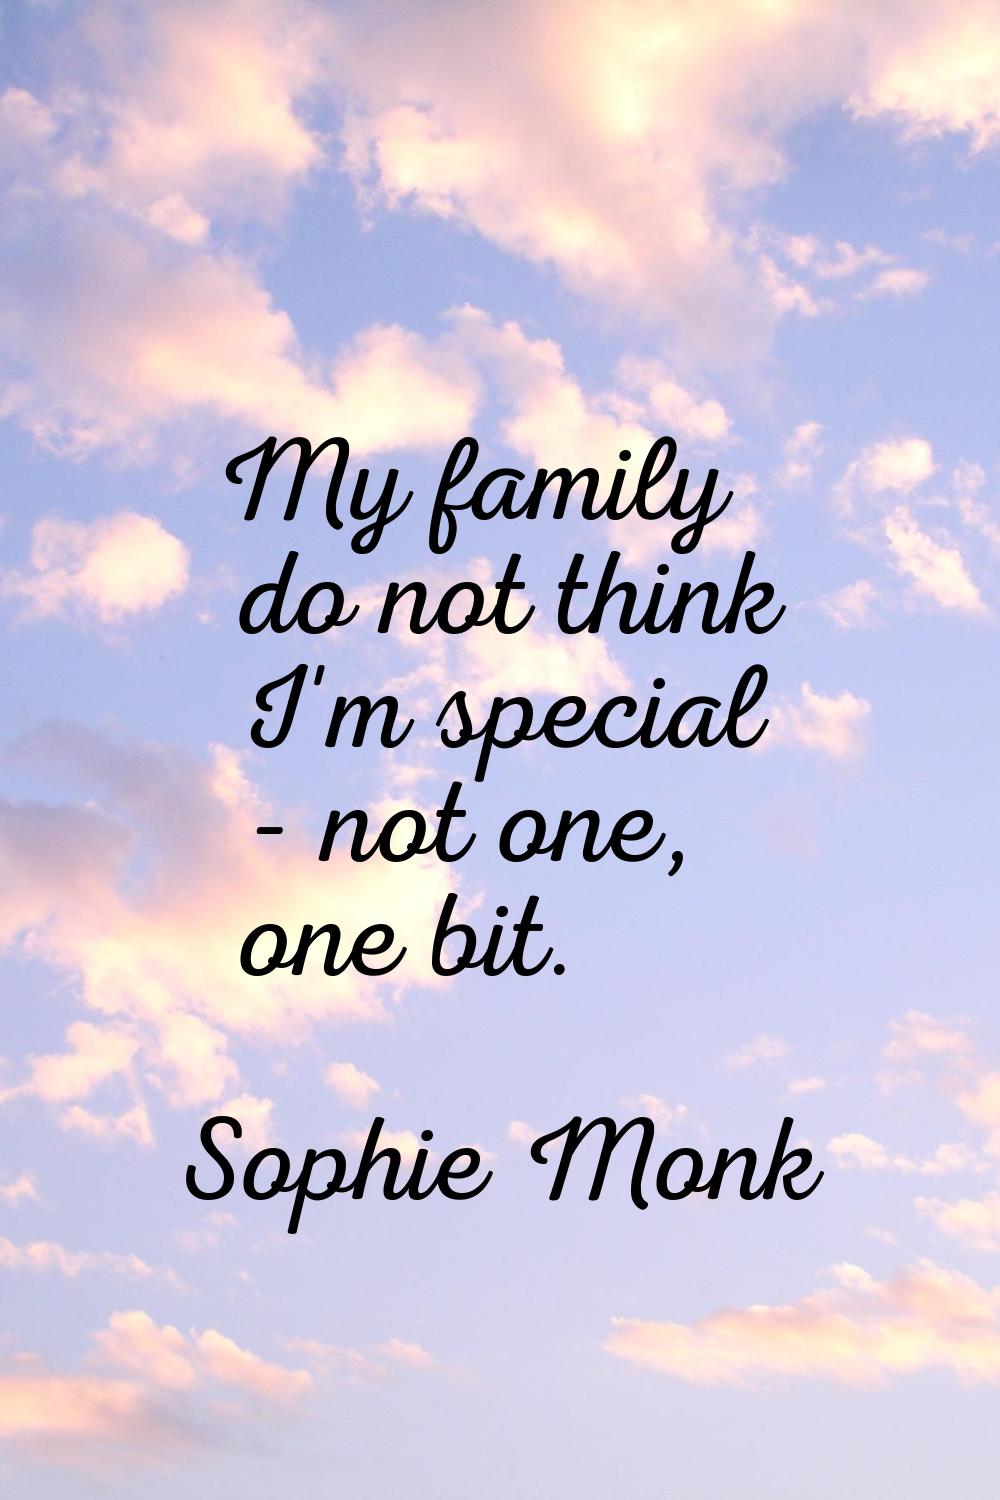 My family do not think I'm special - not one, one bit.